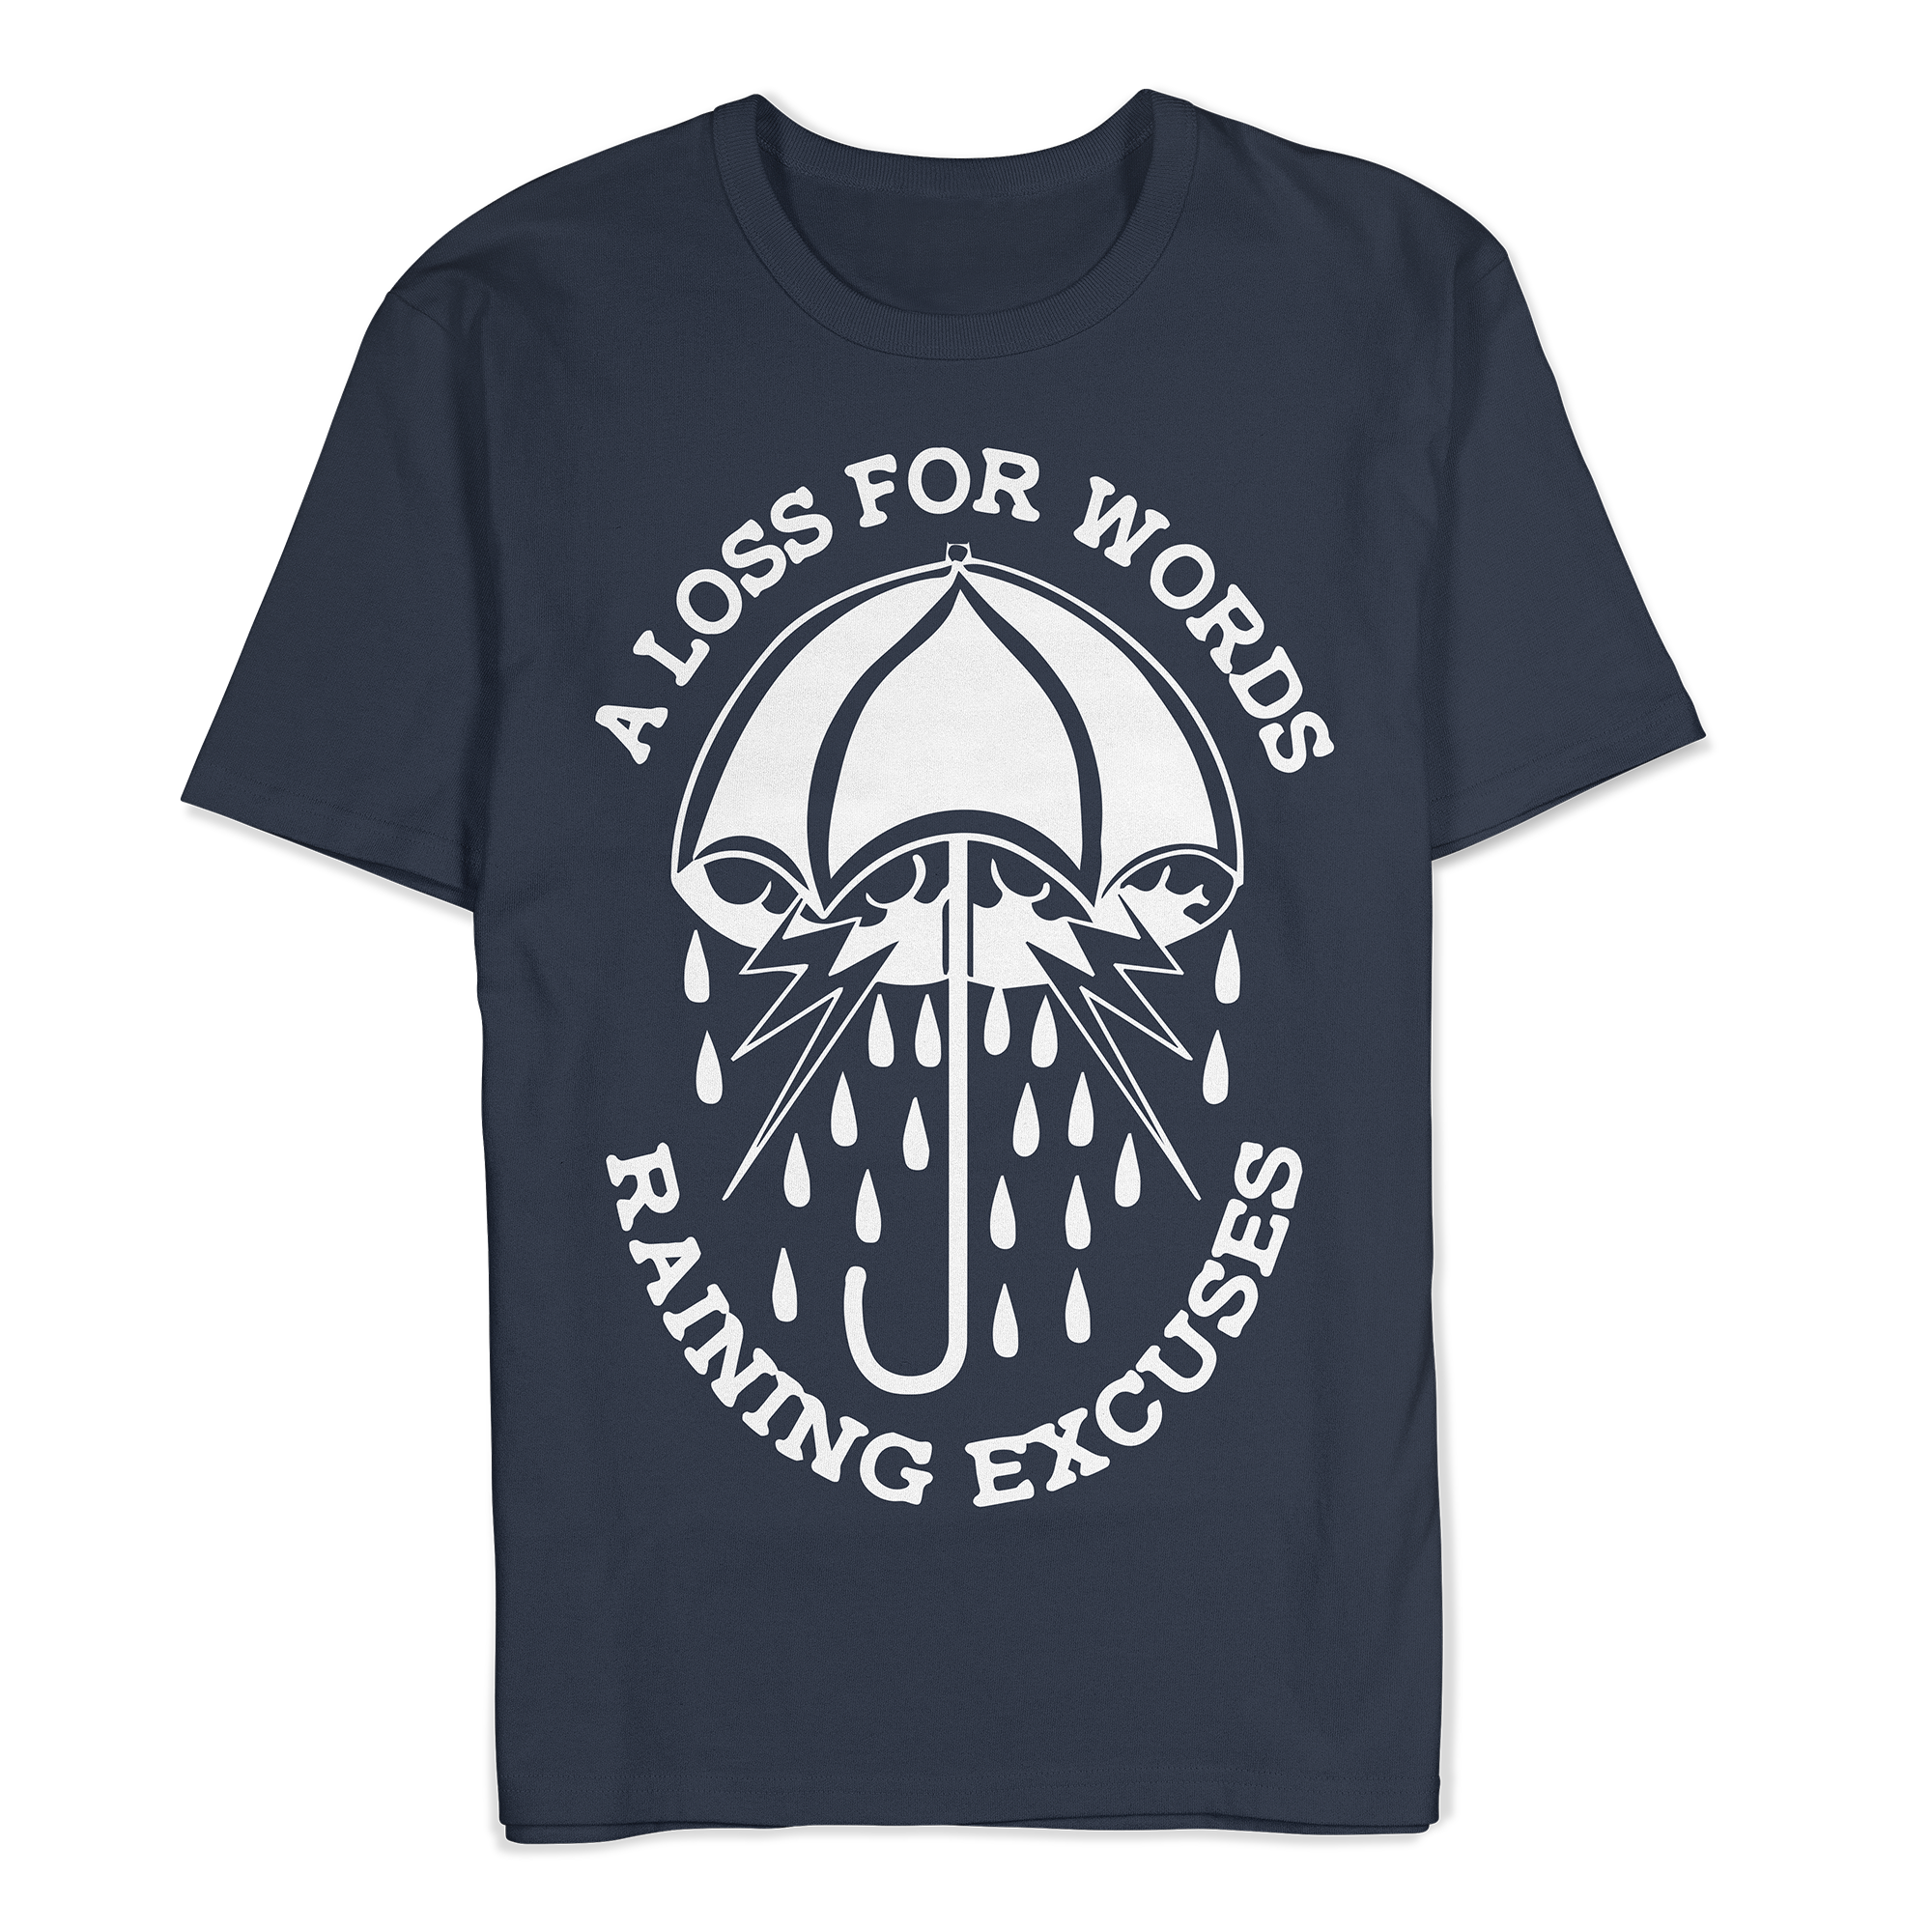 A Loss For Words - Raining Excuses Shirt